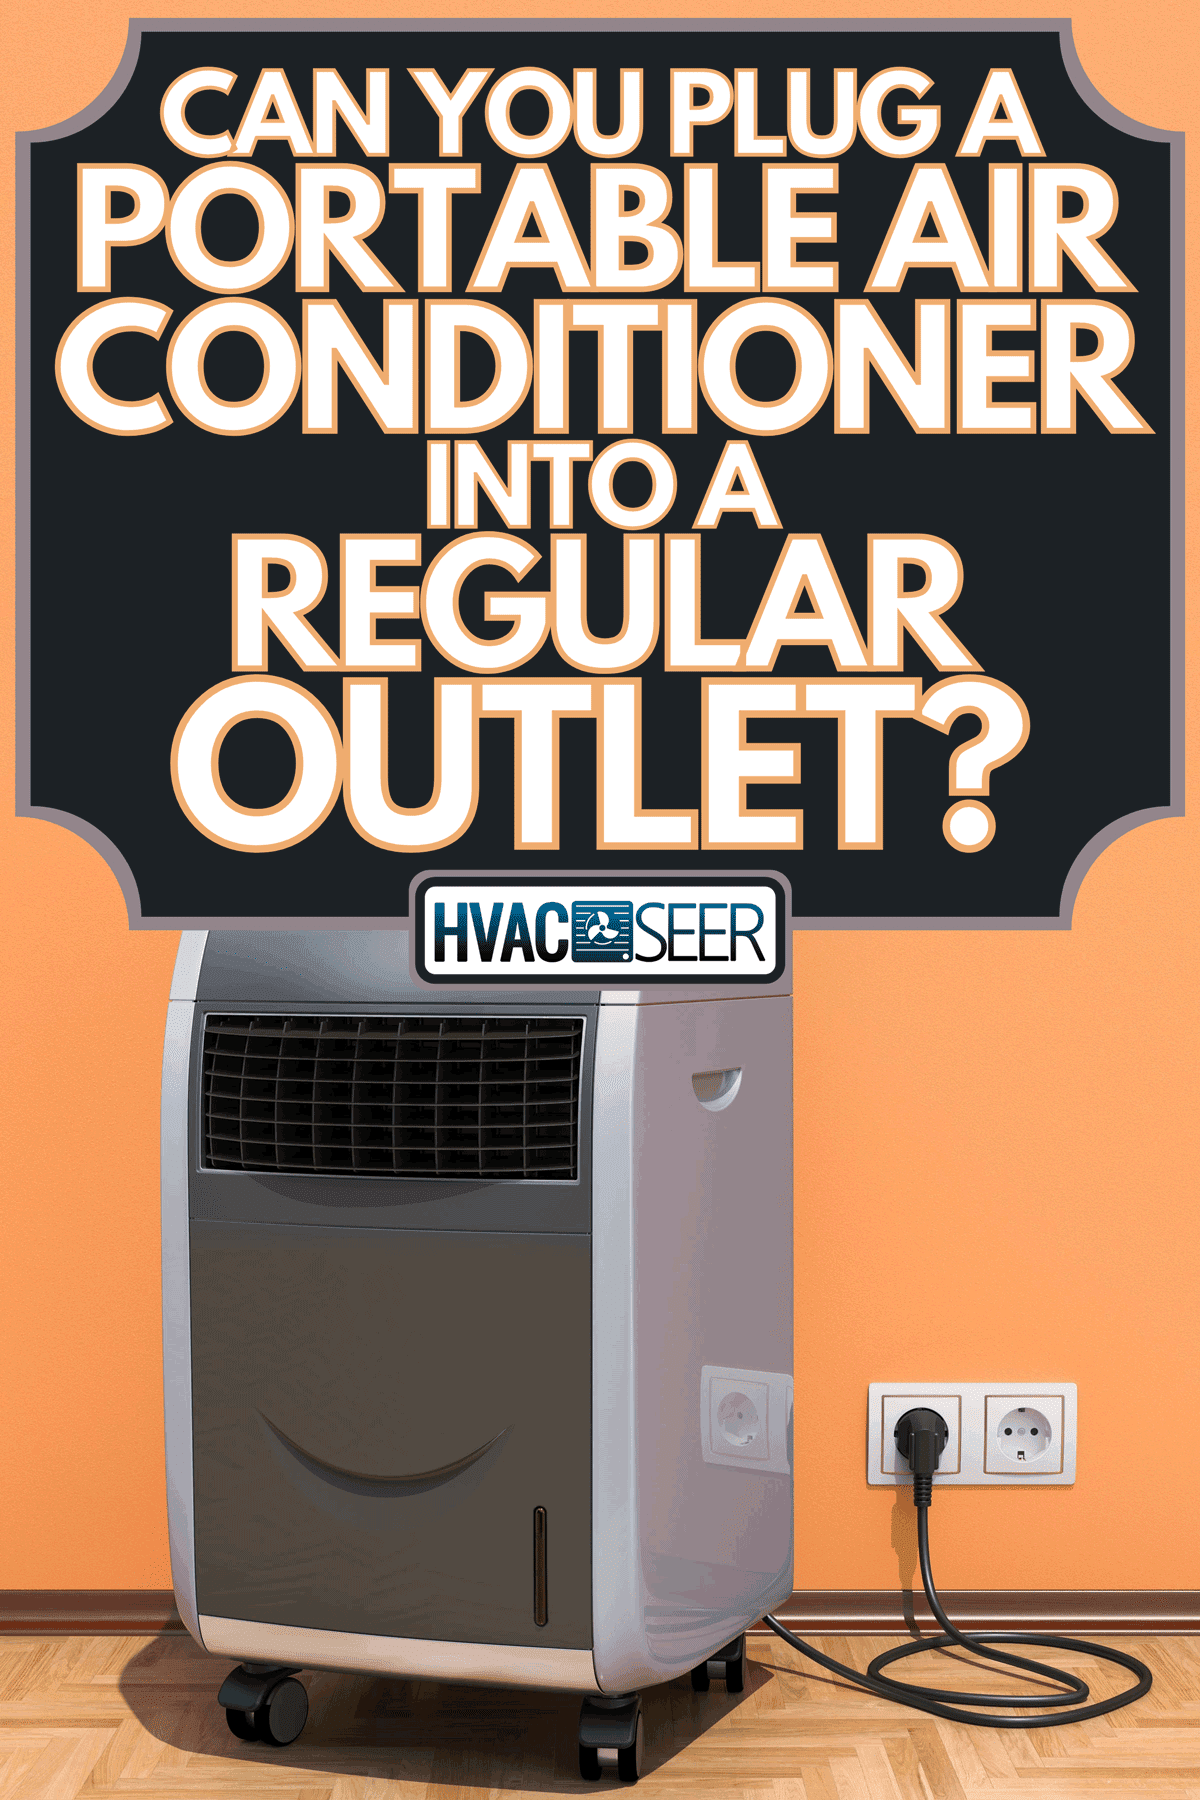 Portable air conditioner was plug on an outlet, Can You Plug A Portable Air Conditioner Into A Regular Outlet?